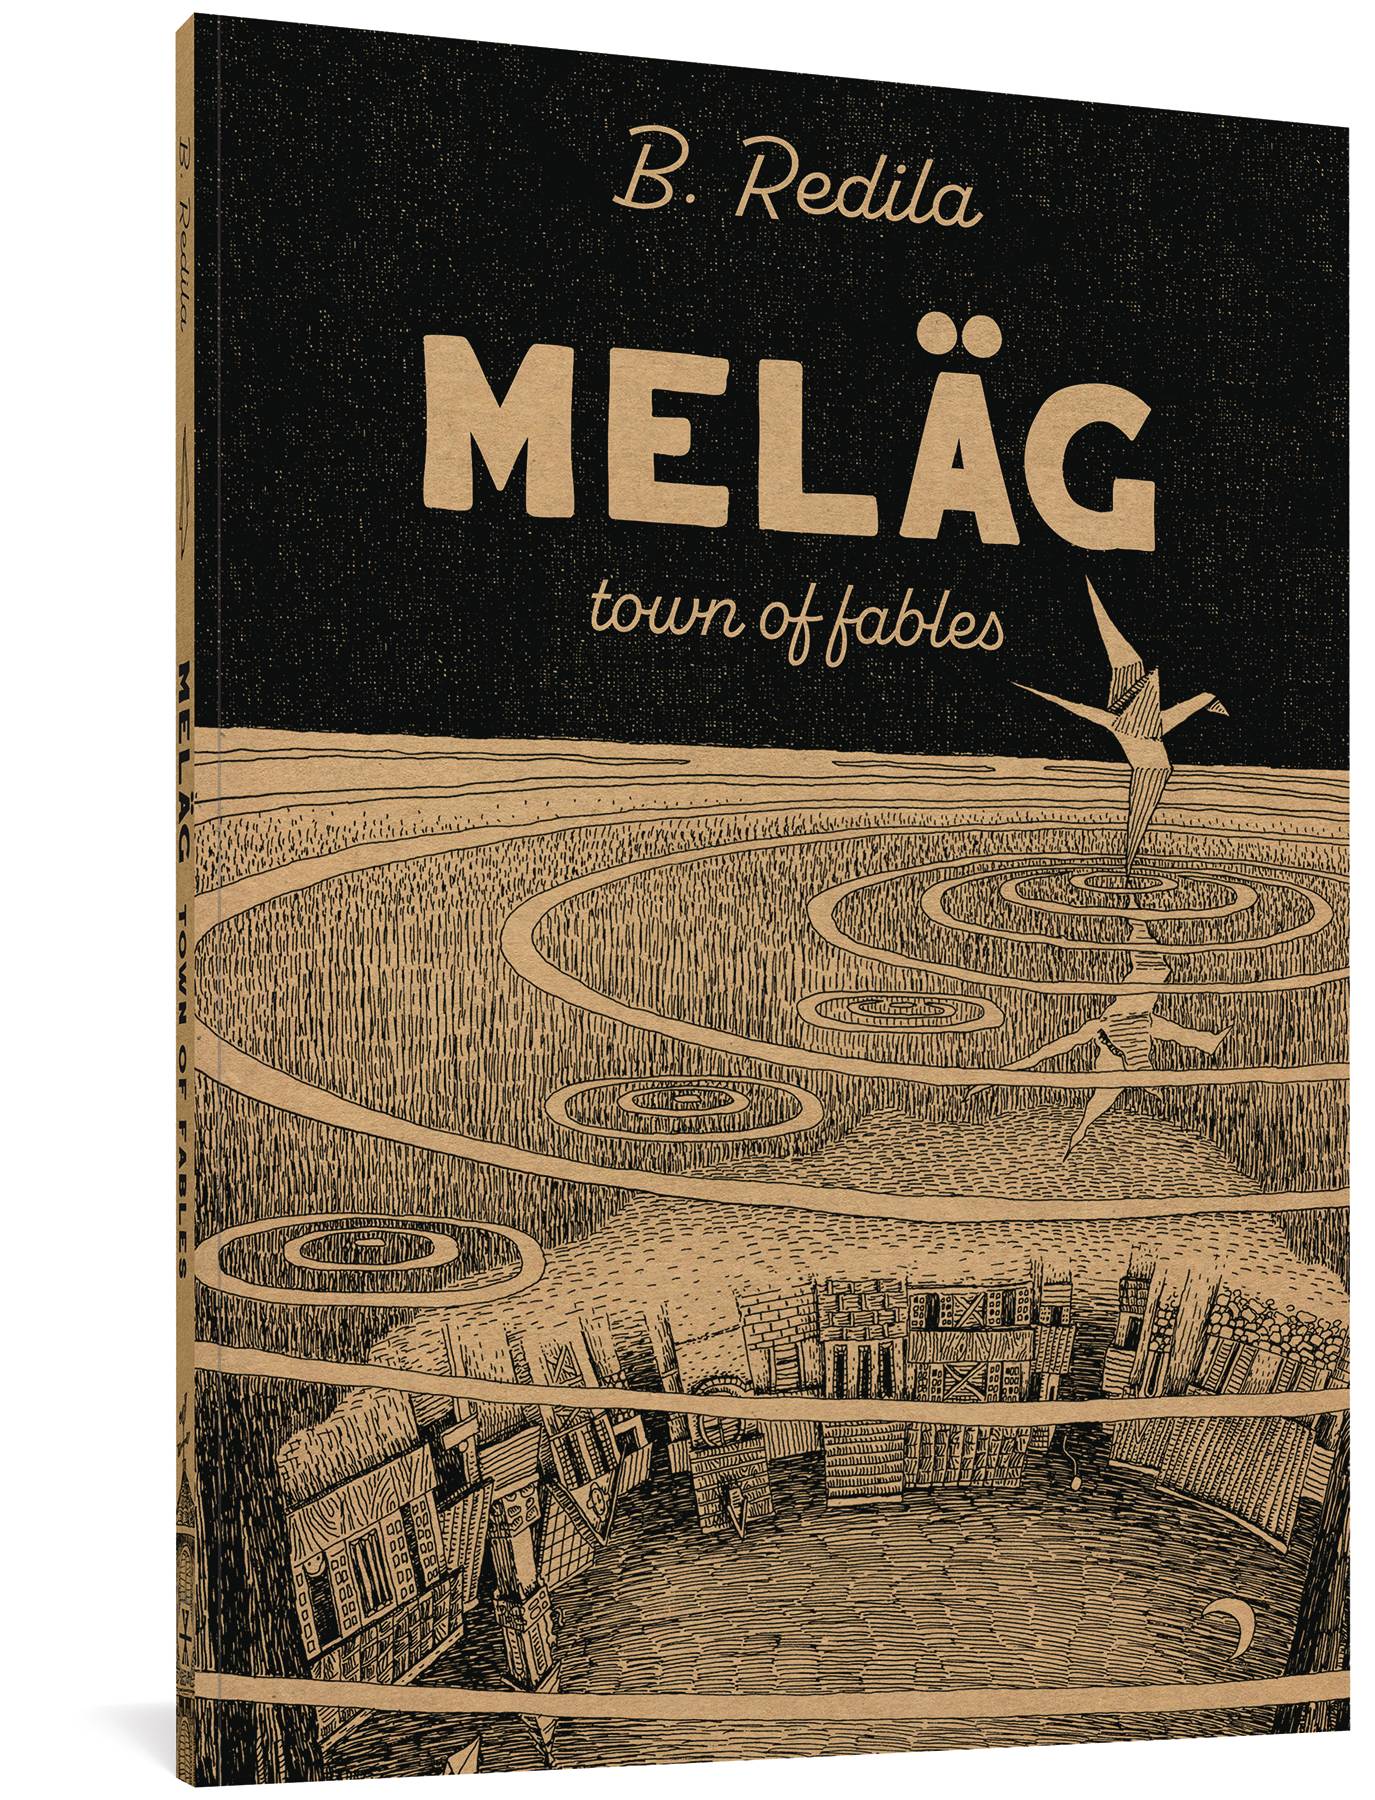 FANTAGRAPHICS UNDERGROUND MELAG TOWN OF FABLES